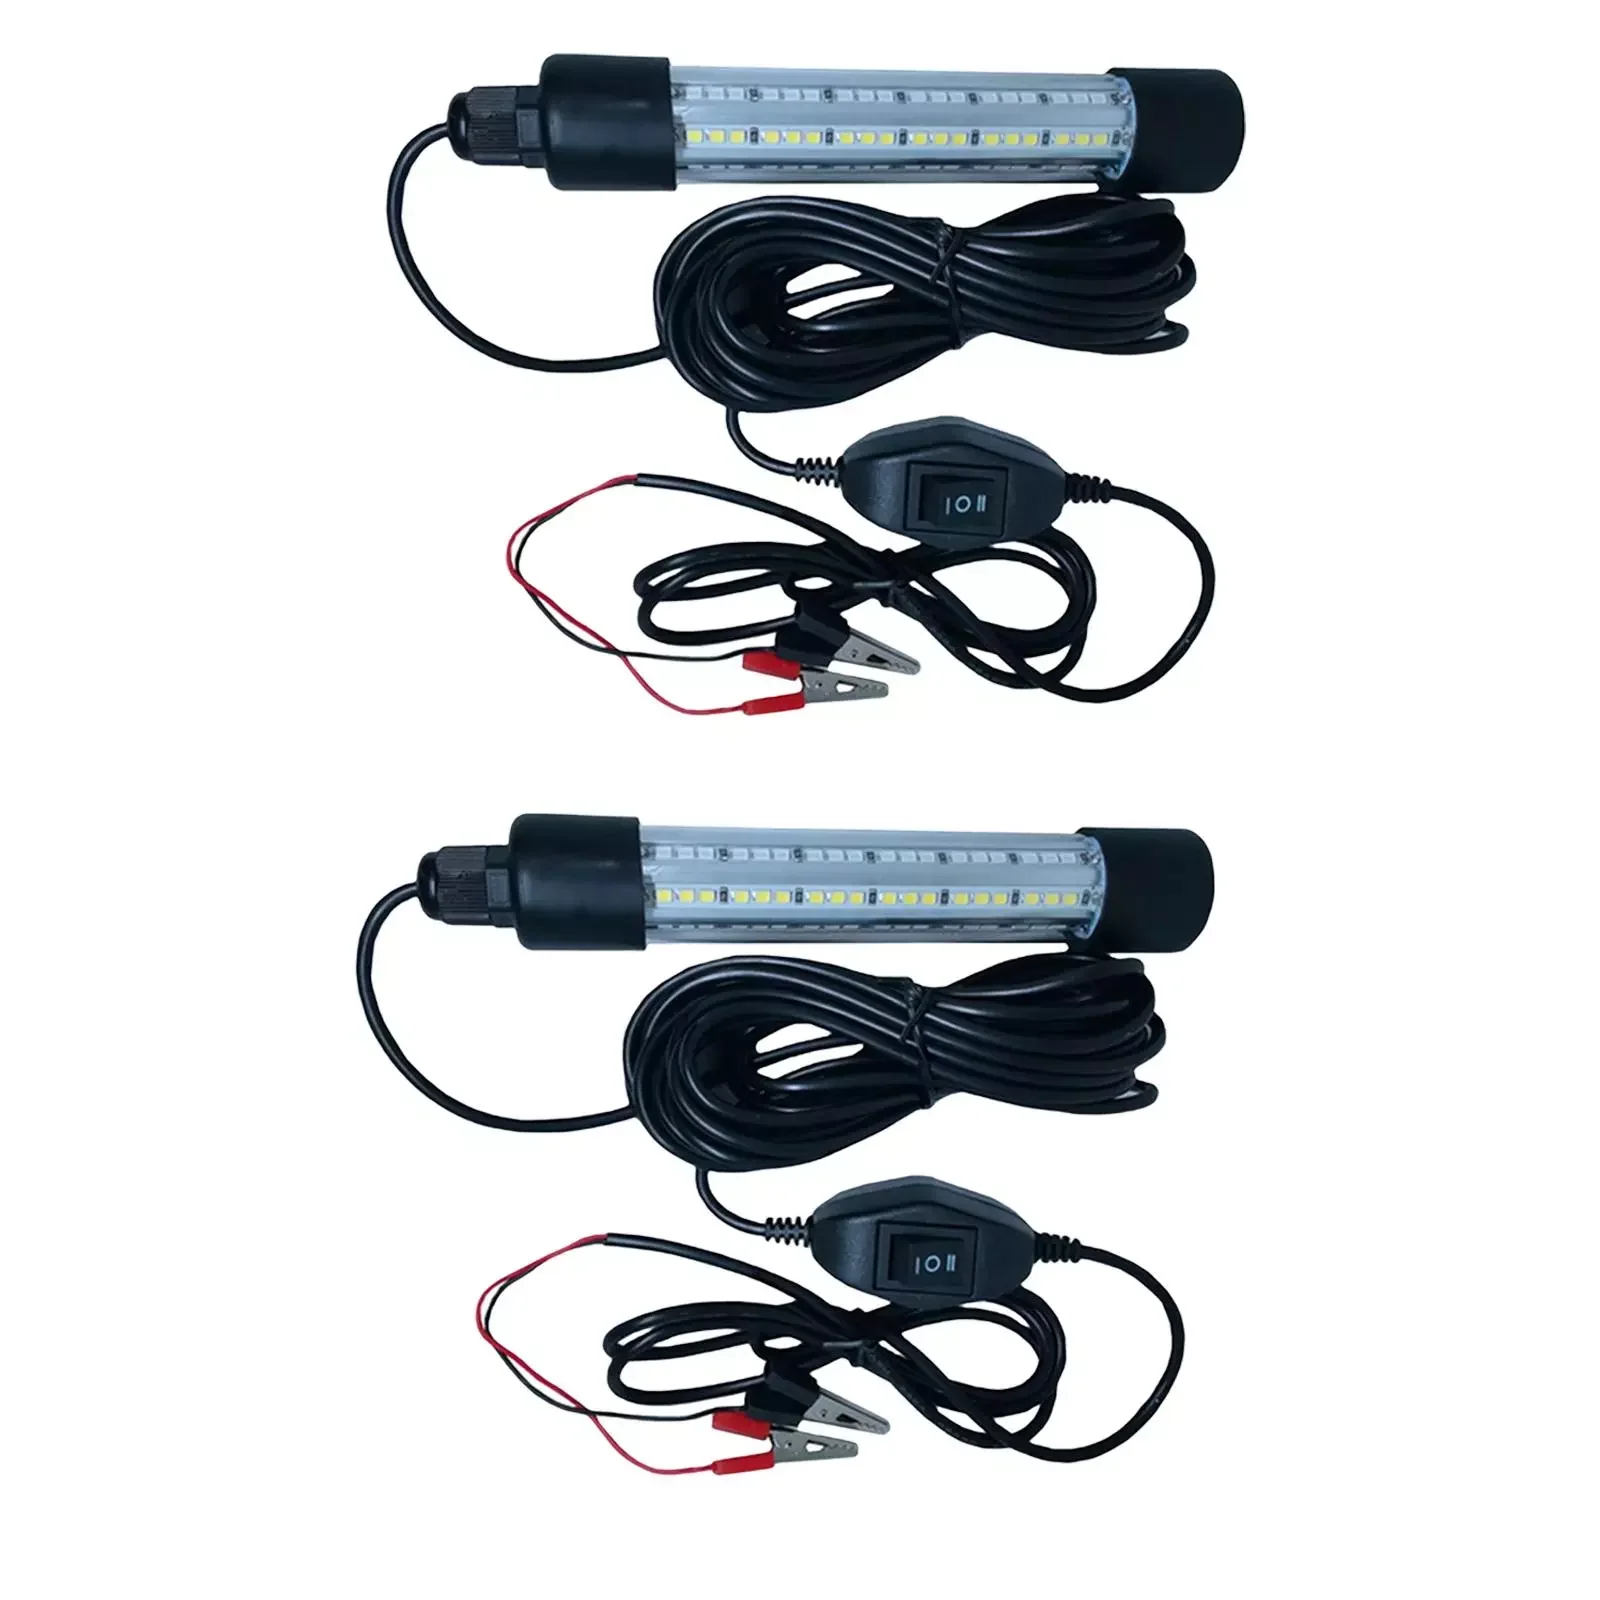 

12V 100W LED Submersible Light Fish Fishing Lamp Underwater Crappie Lure with 5M Cord Bait Fish for Boat Dock Saltwater